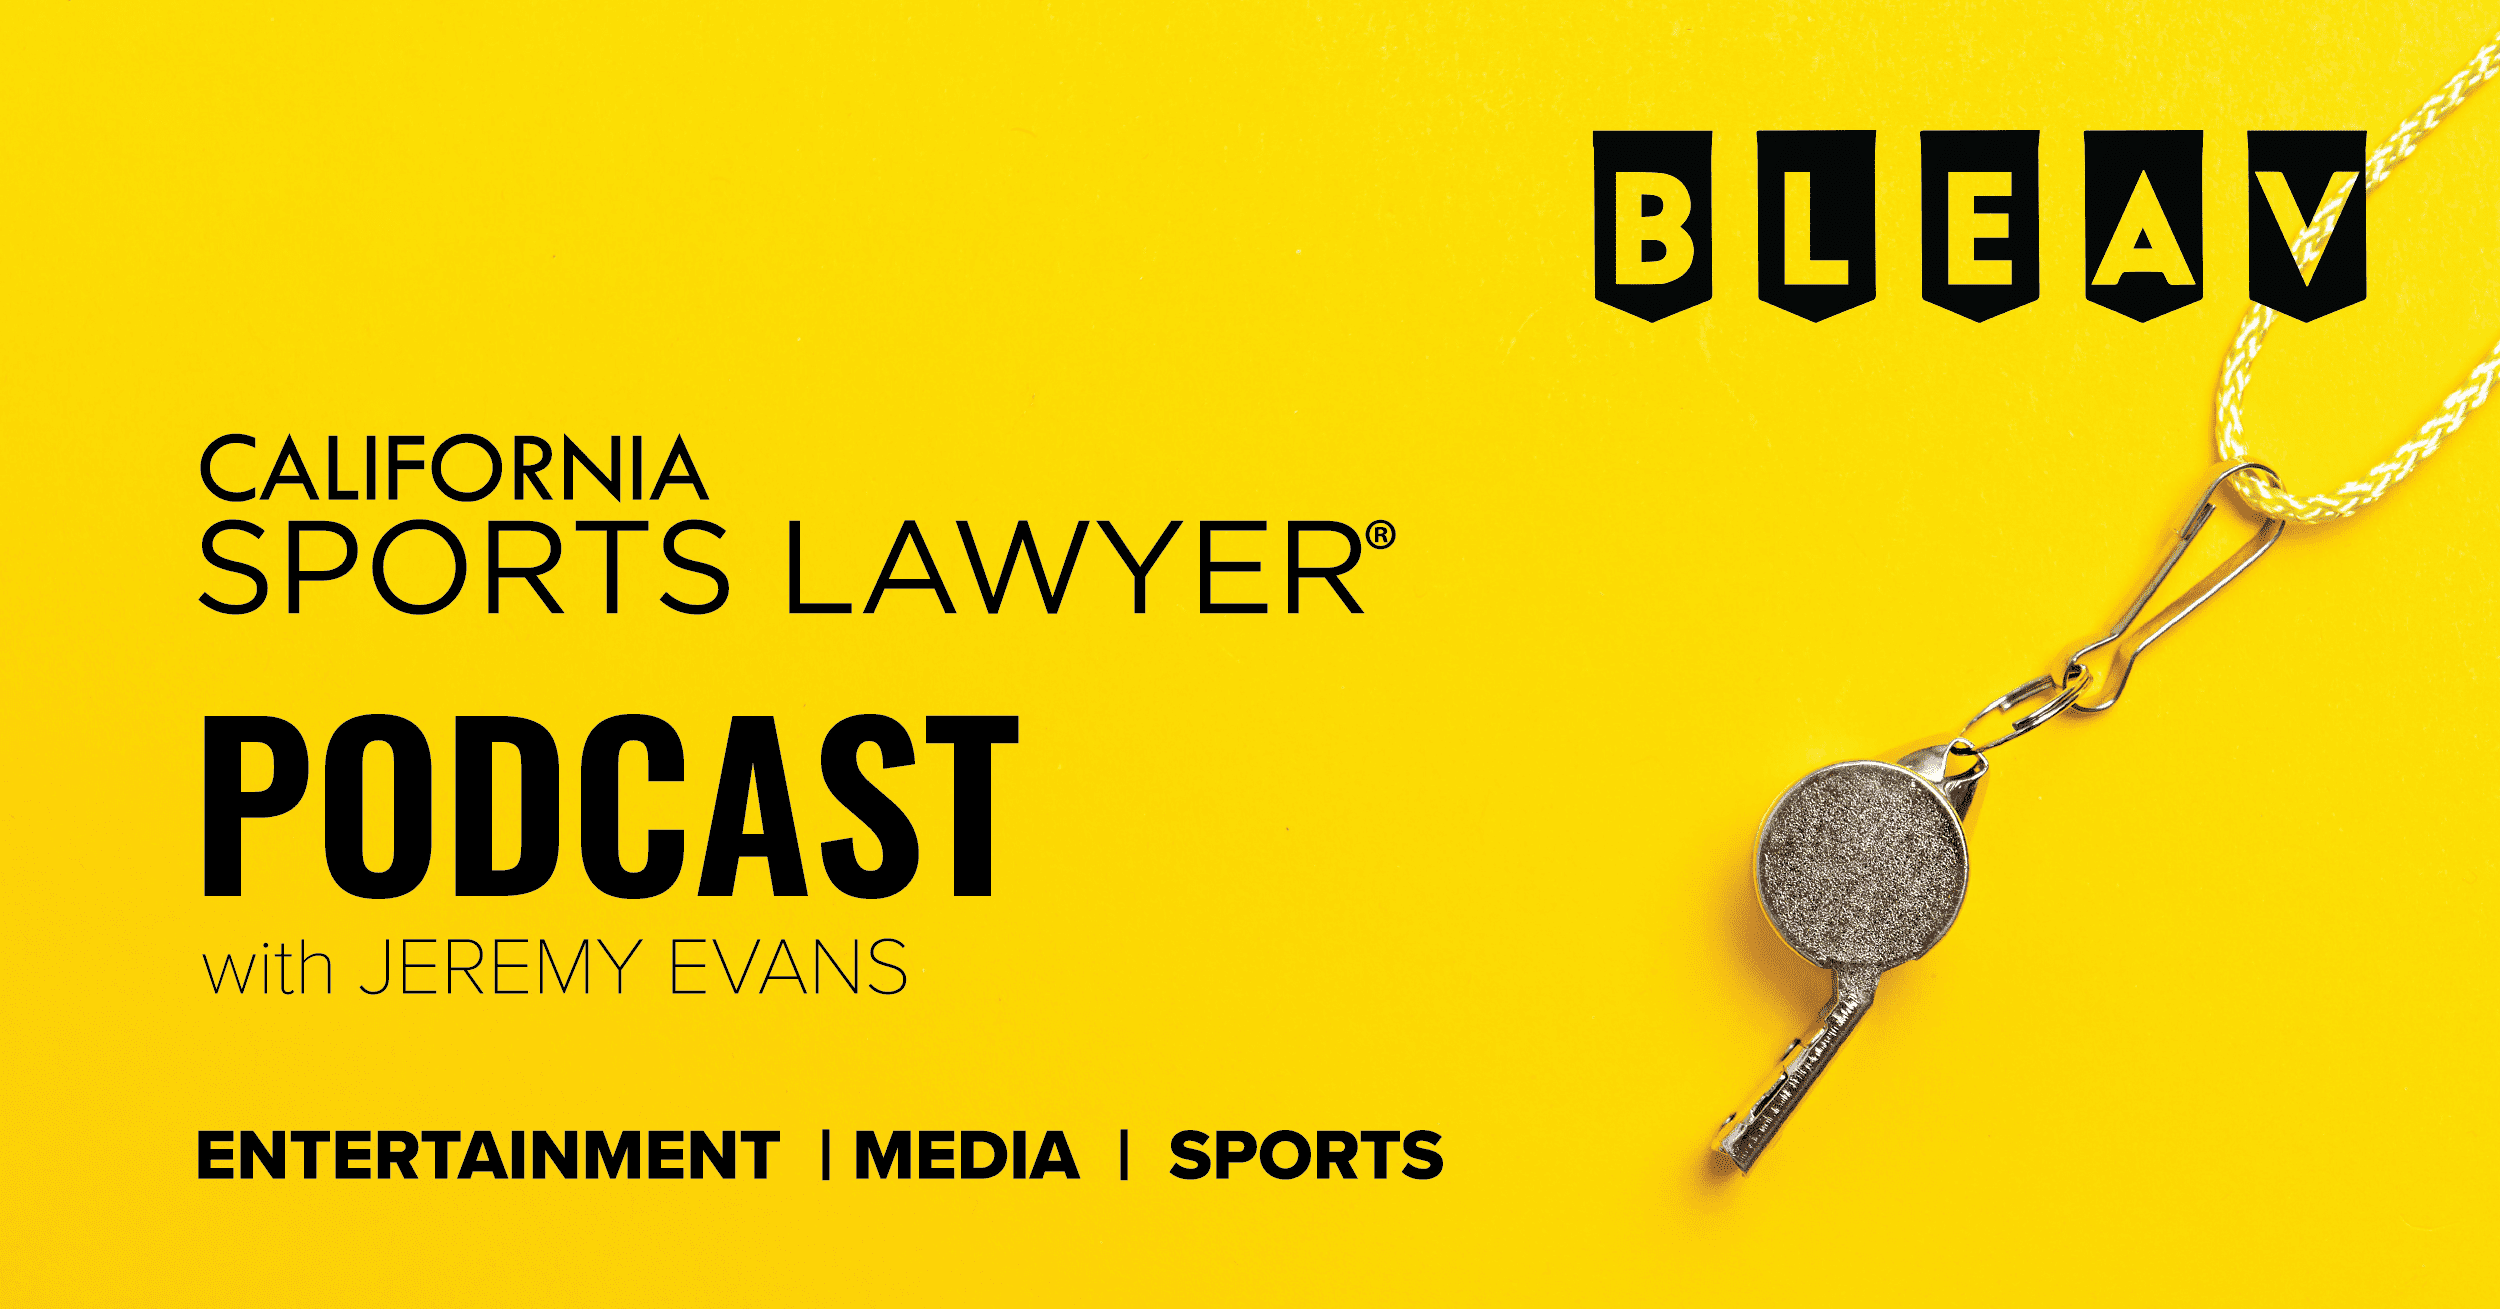 The California Sports Lawyer® Podcast with Jeremy Evans: A Link and Click Theory, Functionality on TikTok Leads to Efficient Consumerism